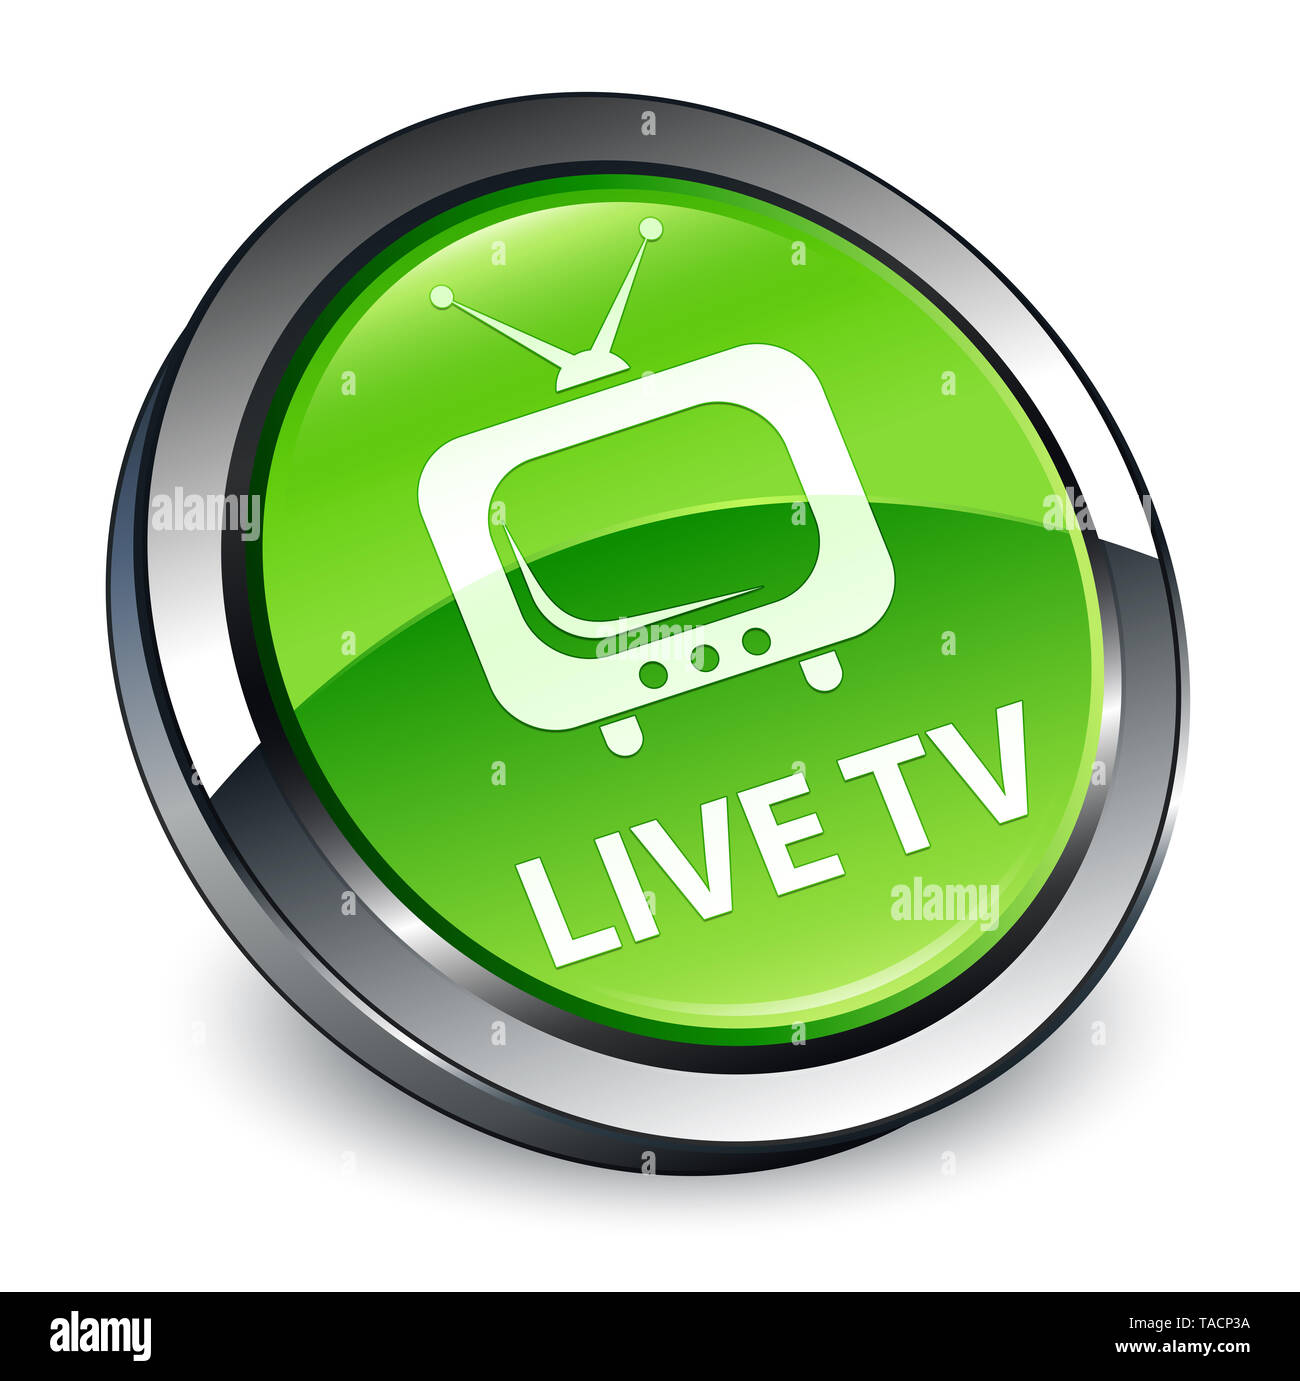 Live tv isolated on 3d green round button abstract illustration Stock Photo